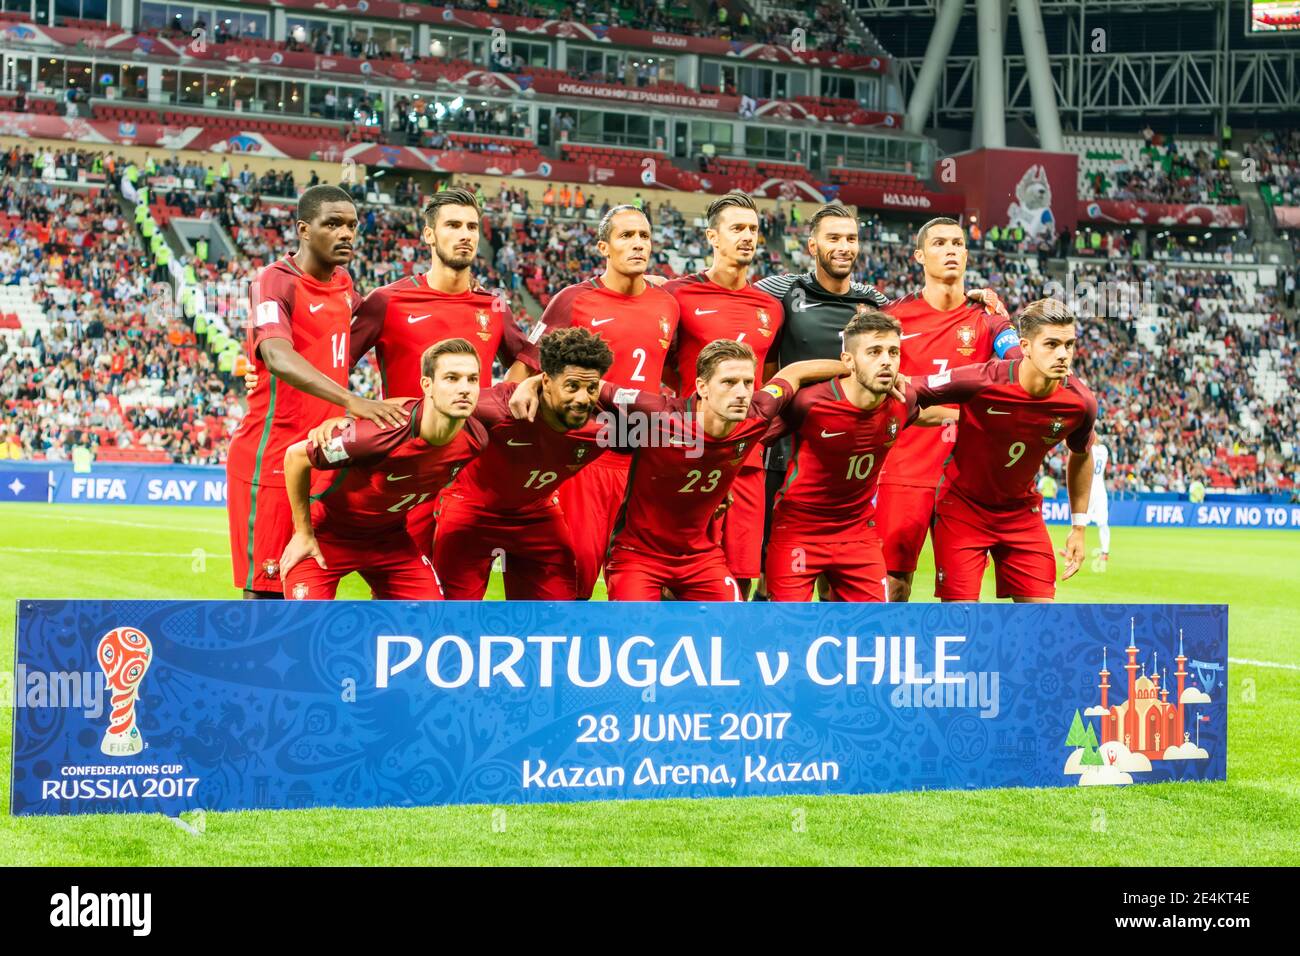 Kazan, Russia – June 28, 2017. Team photo of Portugal national football team before FIFA Confederations Cup 2017 match Portugal vs Chile. Stock Photo